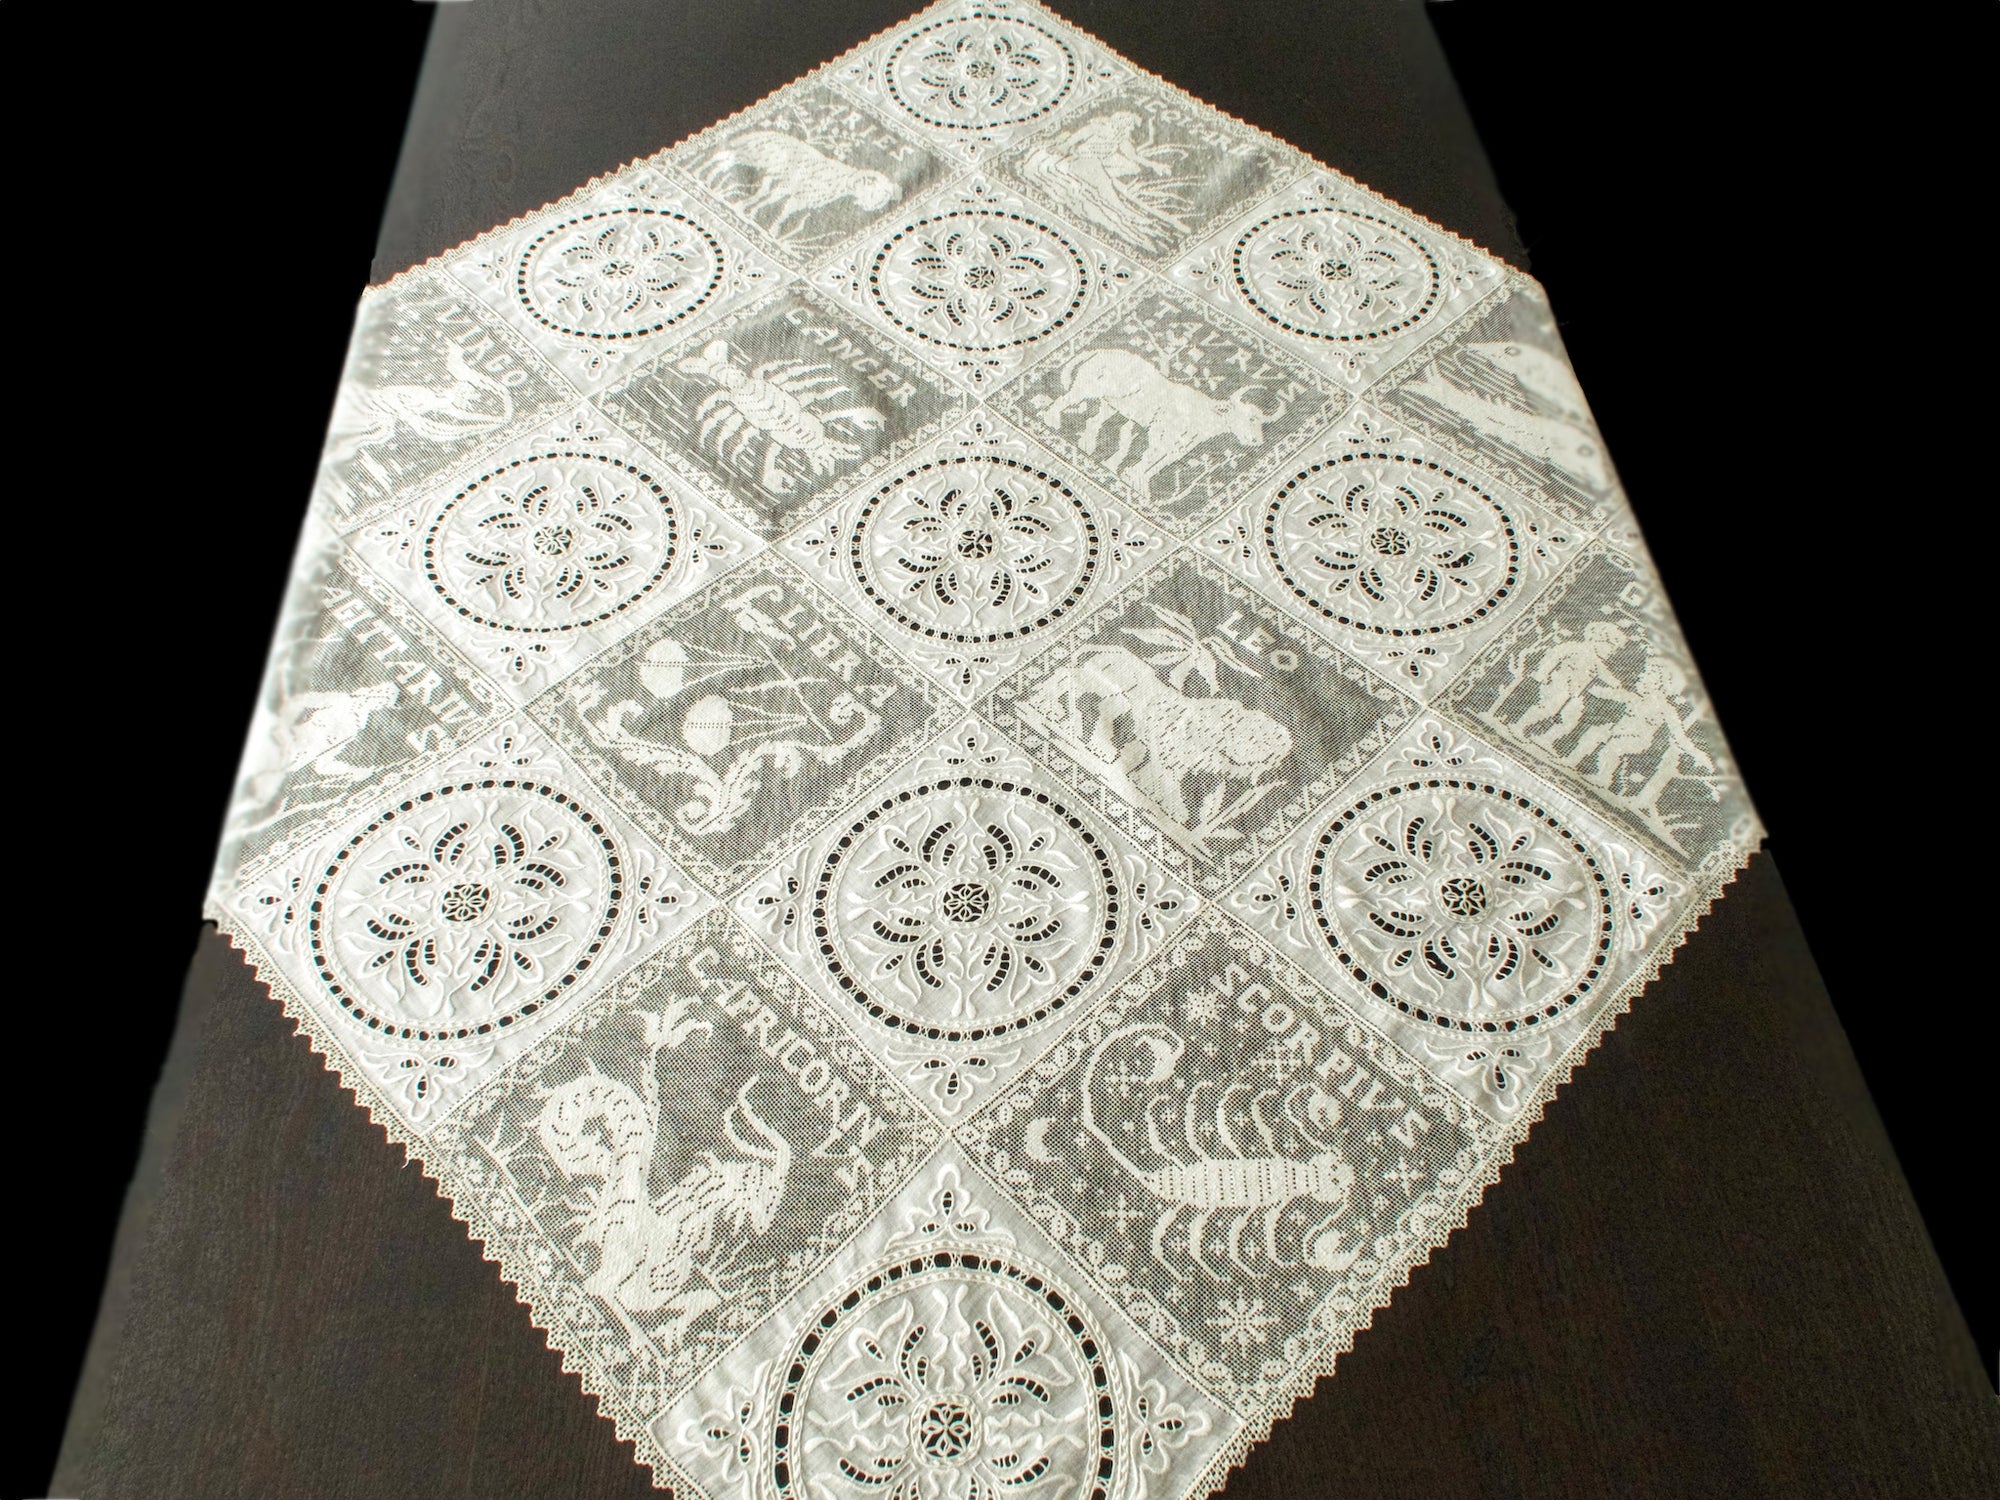 Zodiac Antique French Mixed Lace Tablecloth Topper 35x35"